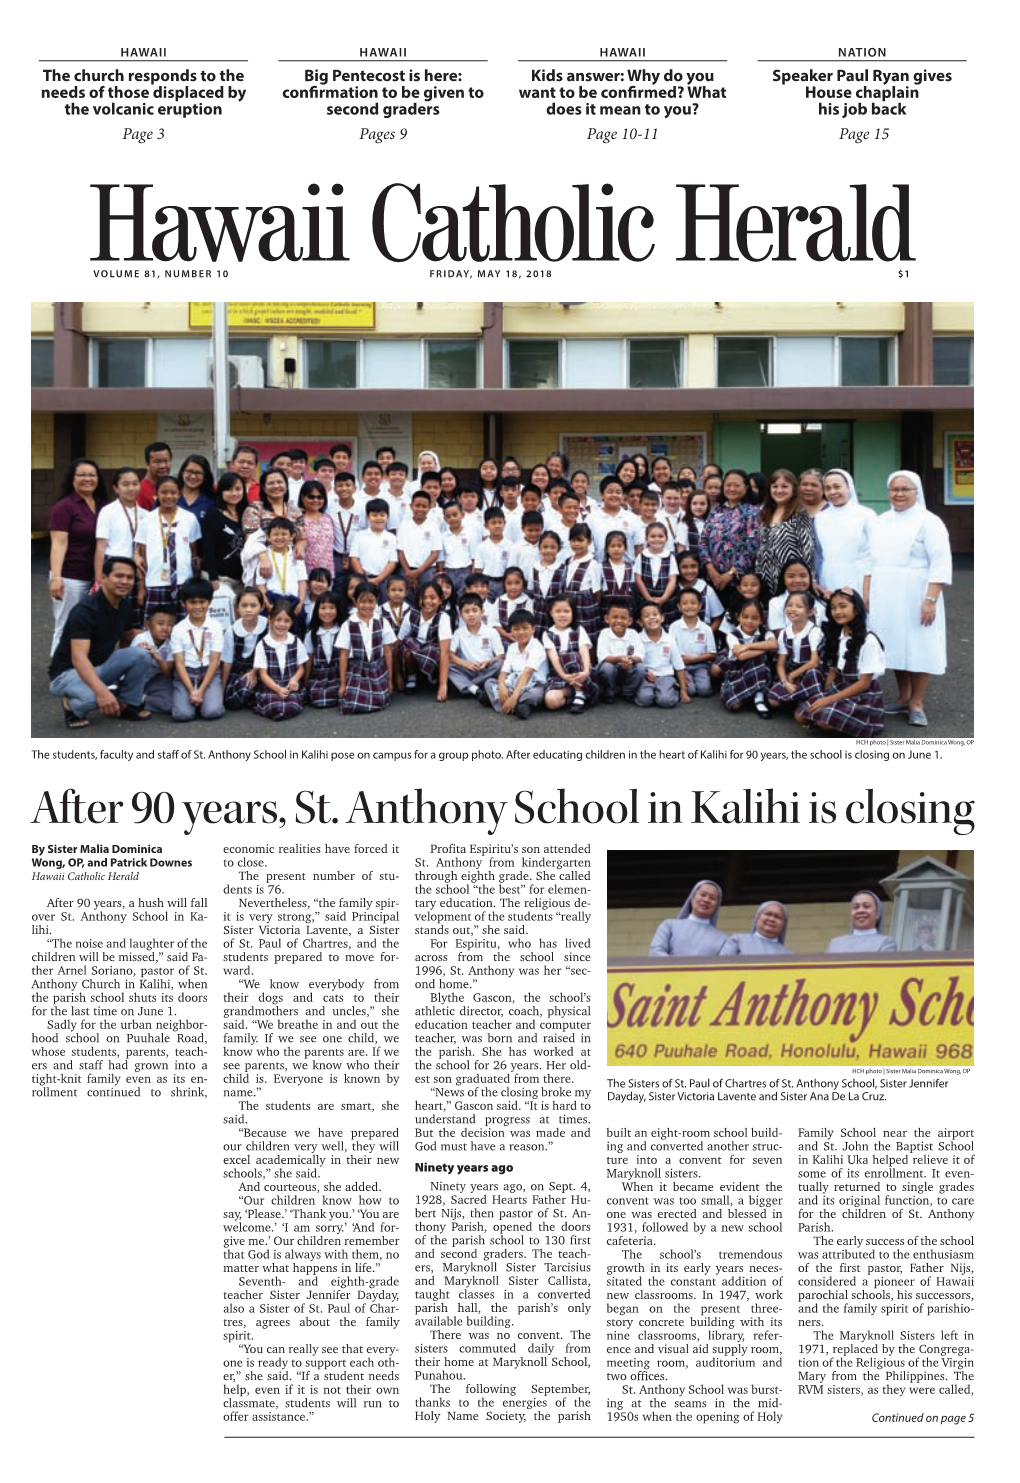 After 90 Years, St. Anthony School in Kalihi Is Closing